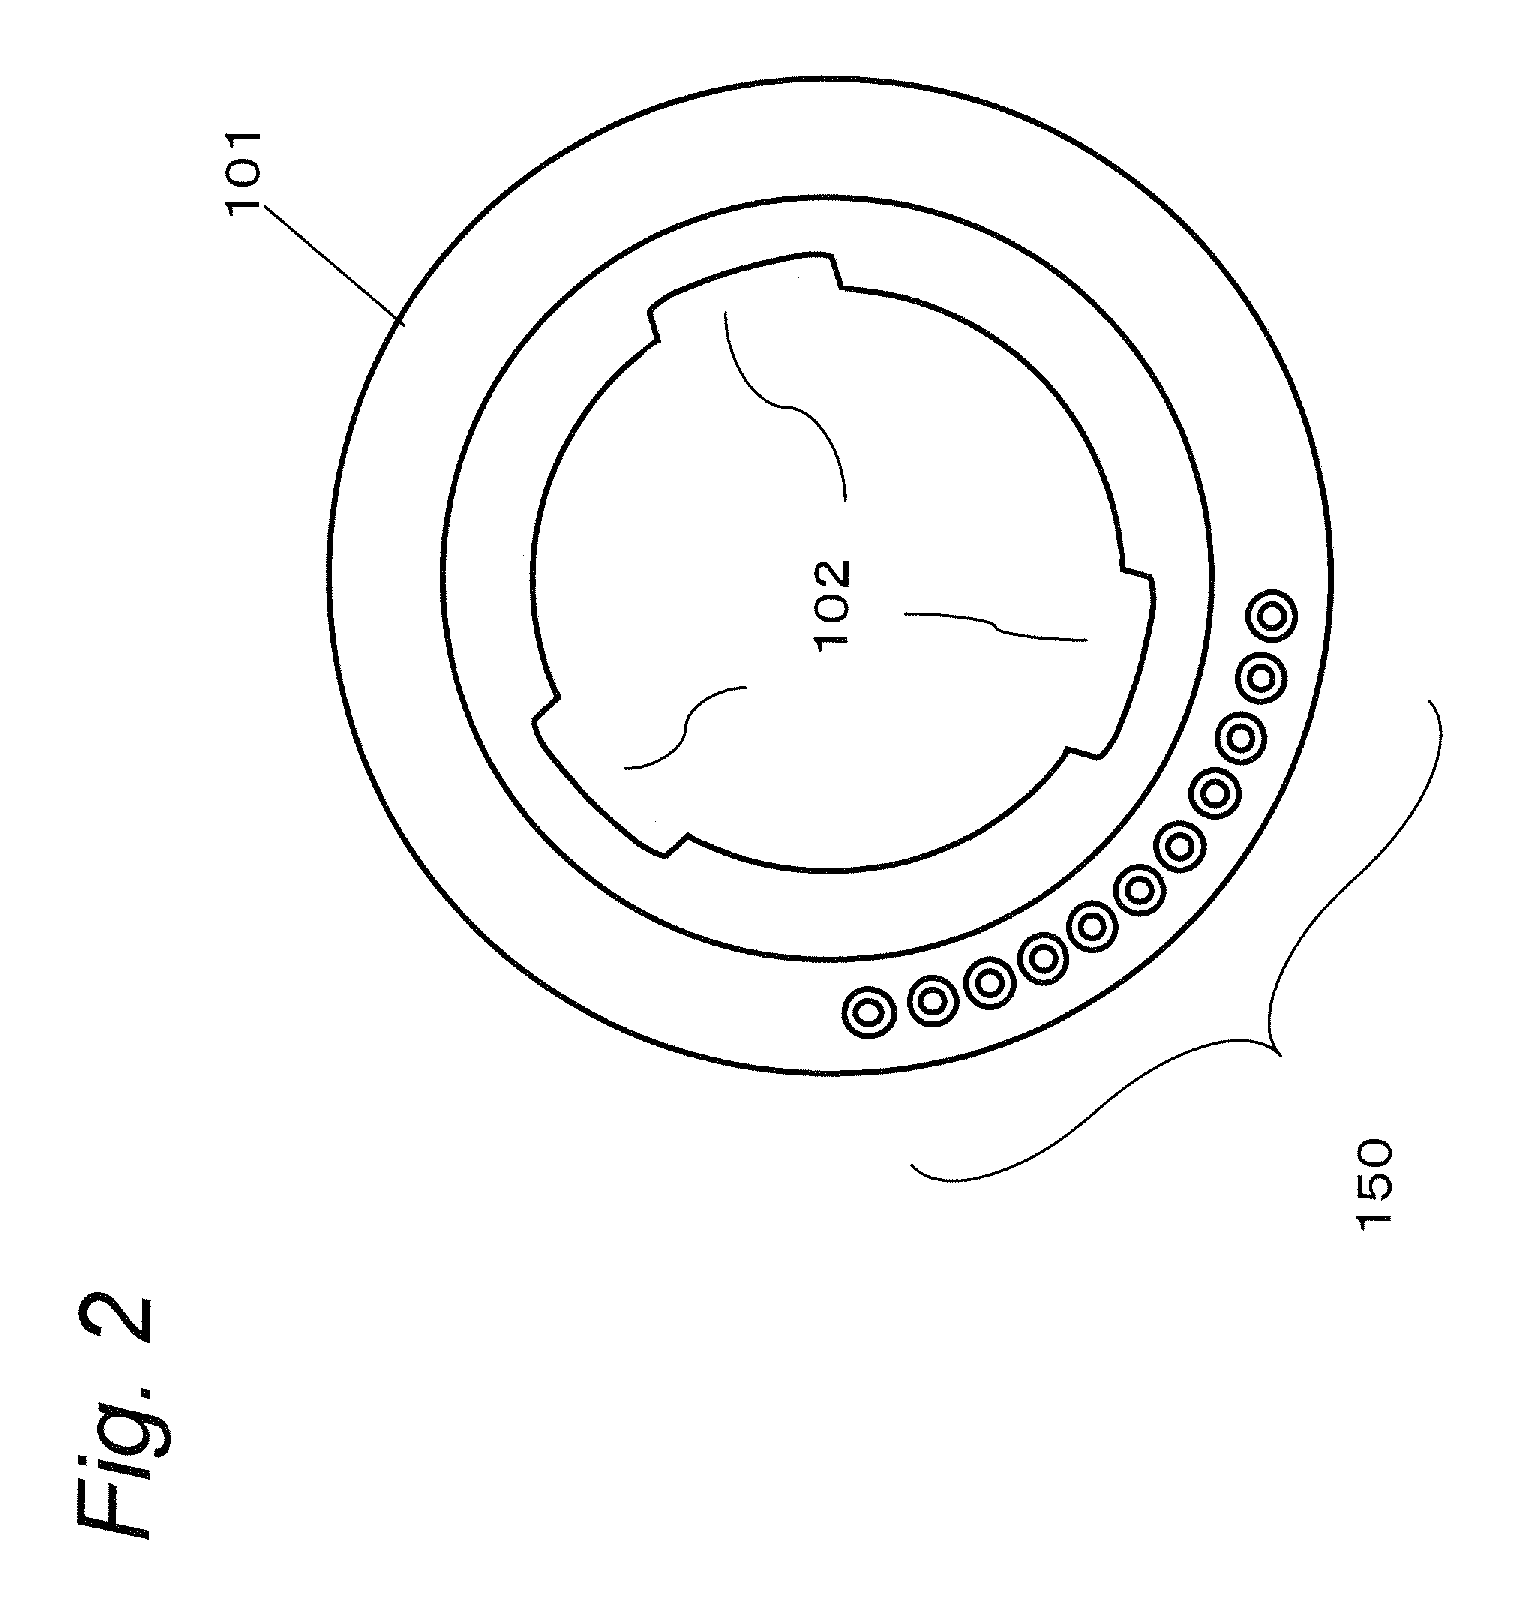 Intermediate adapter, camera body and imaging system